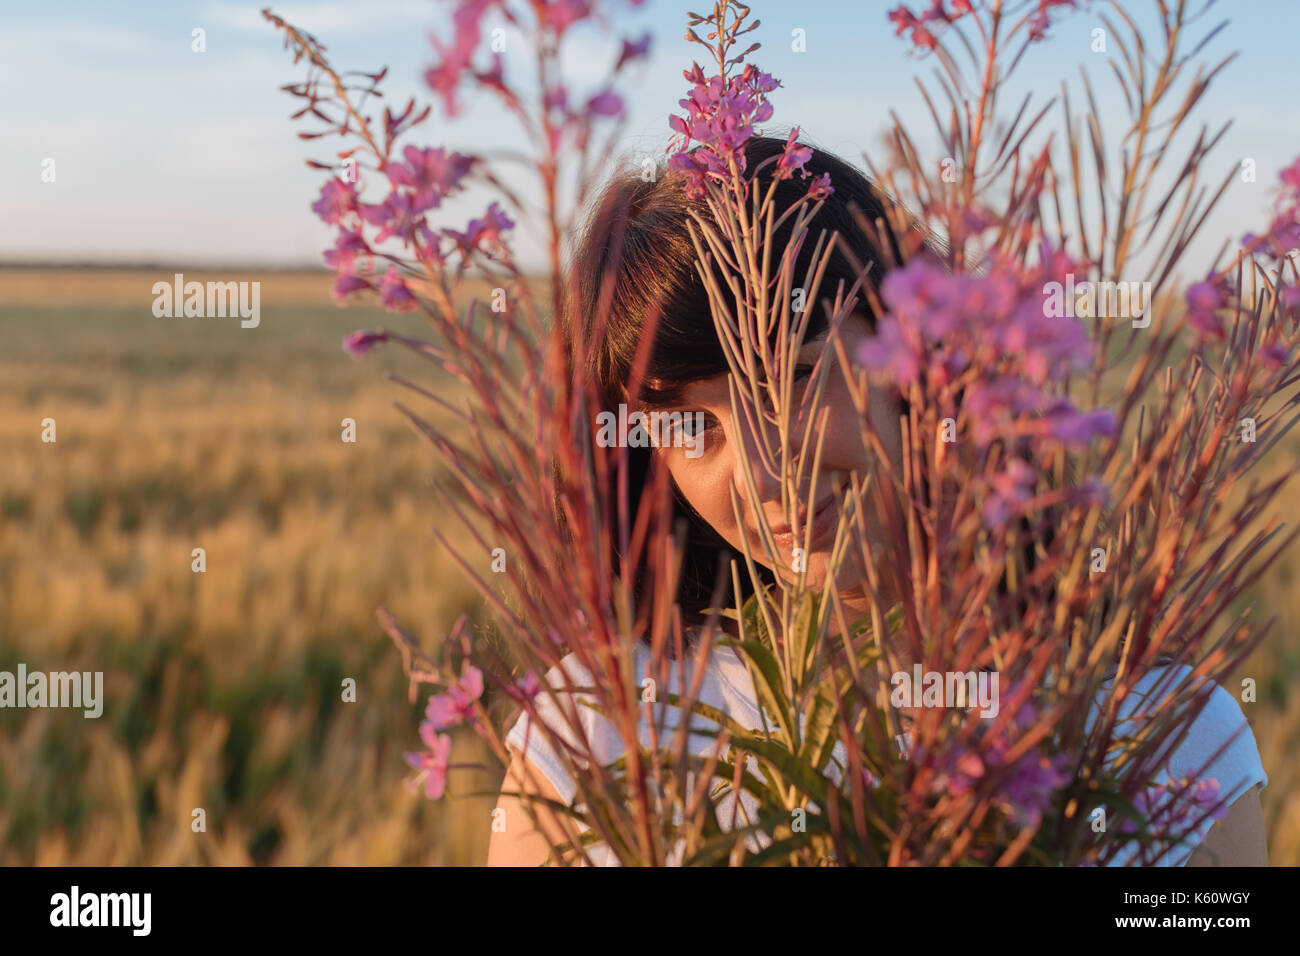 Beautiful girl in the field hiding behind flowers. Stock Photo